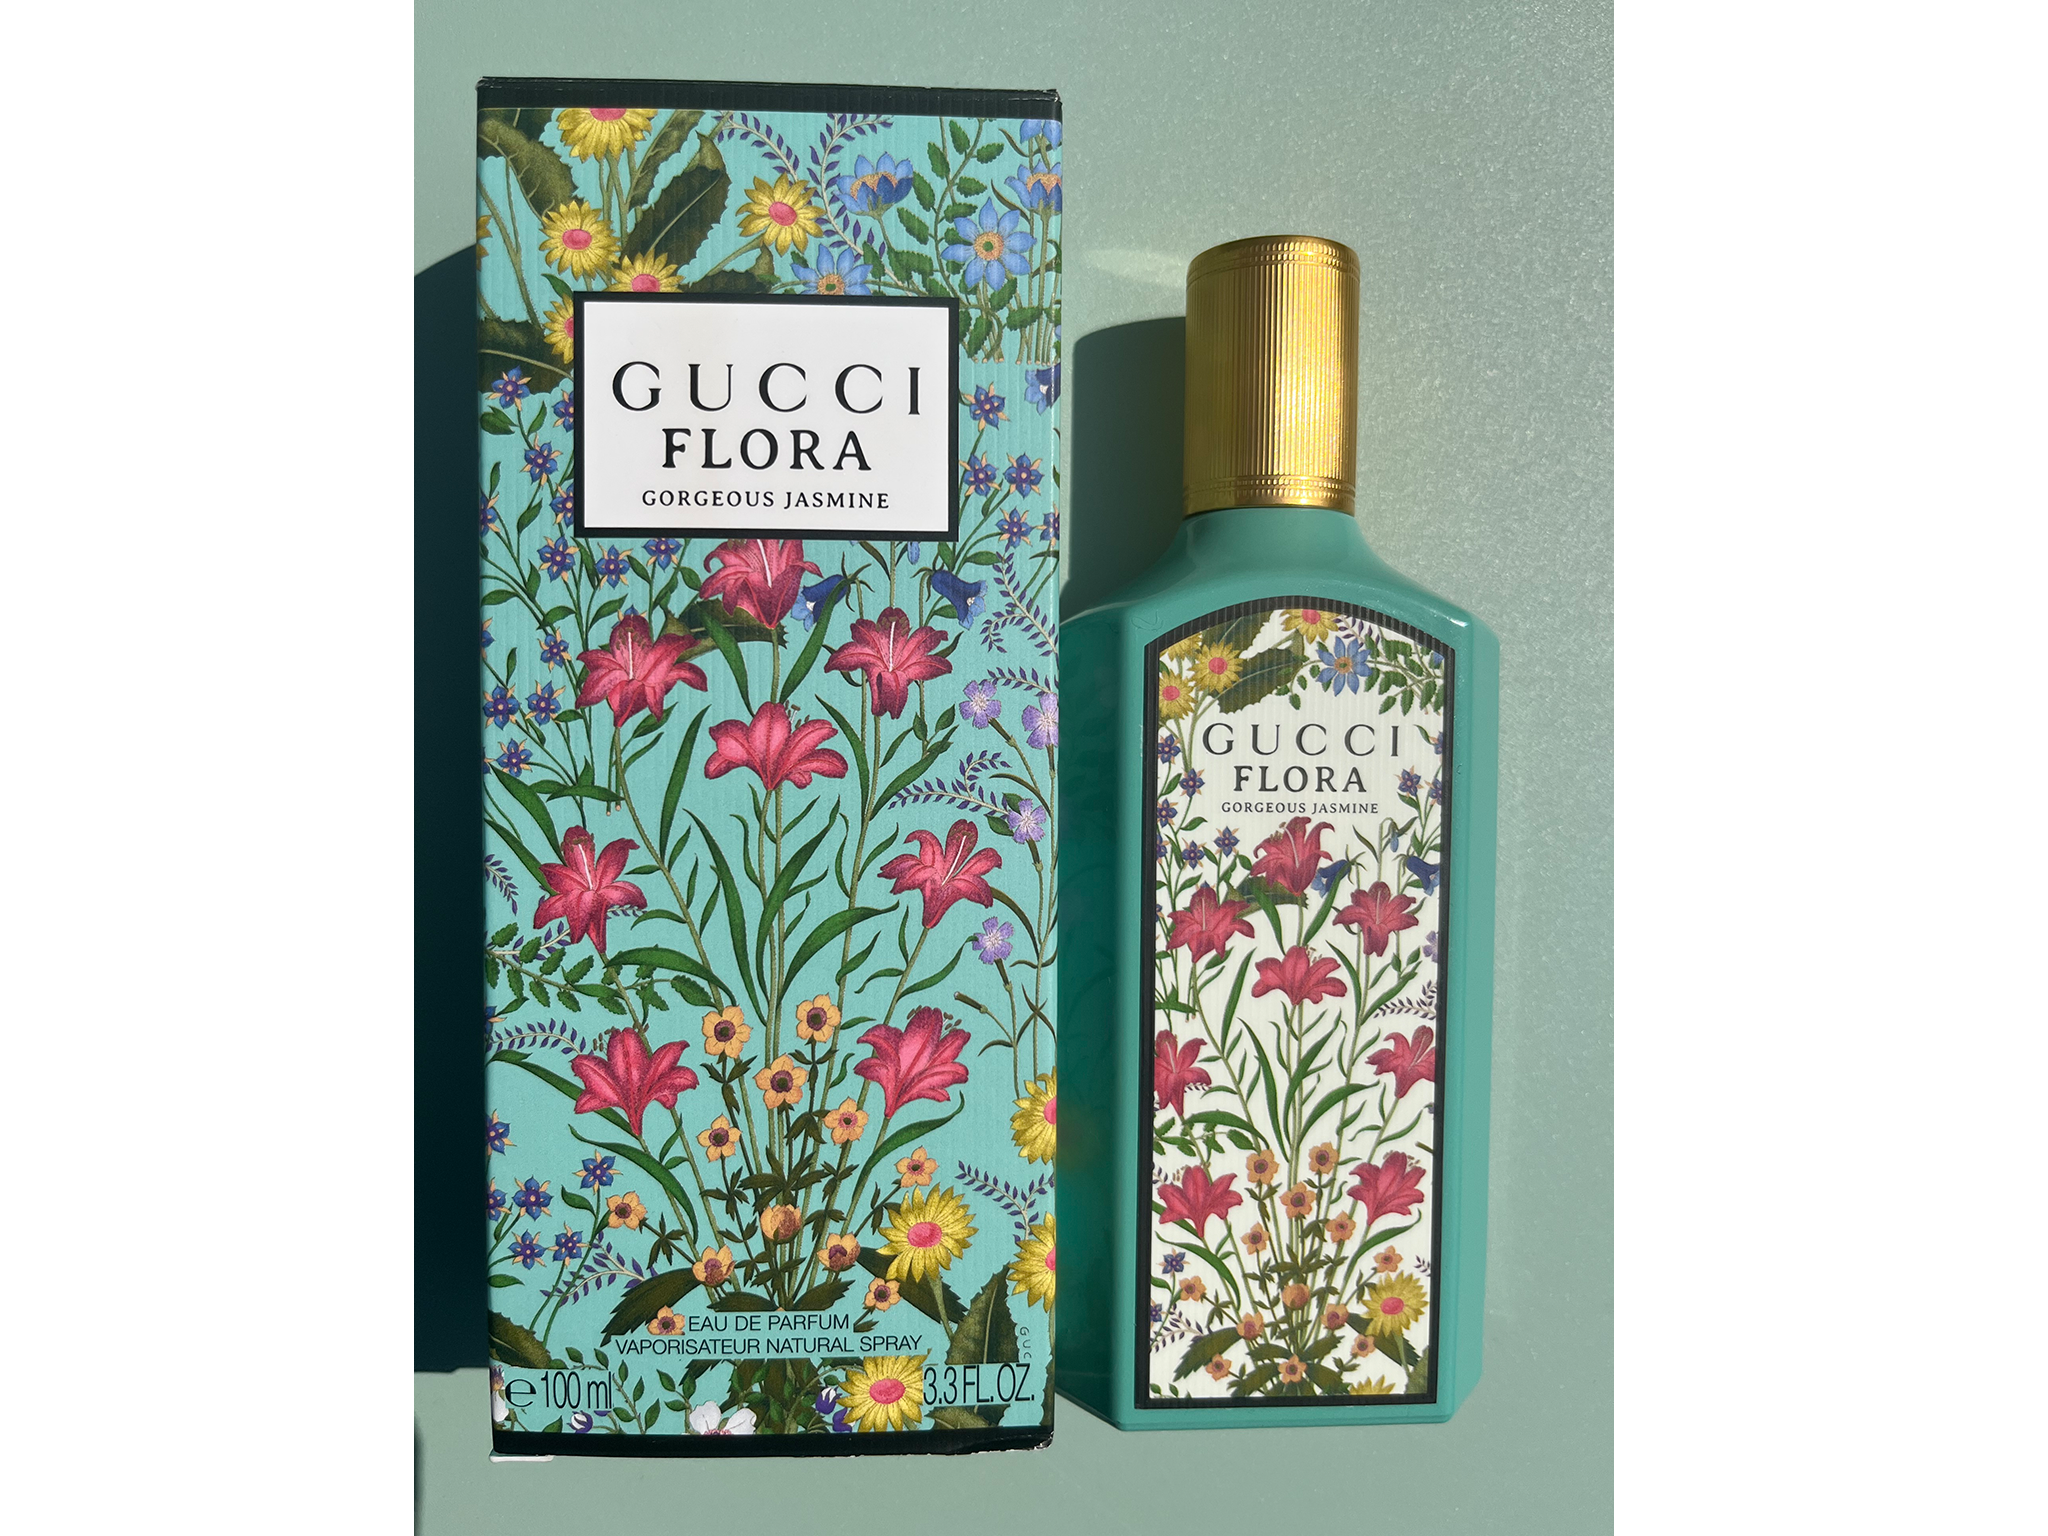 Gucci flora gorgeous jasmine perfume review: A fresh scent that lingers all  day